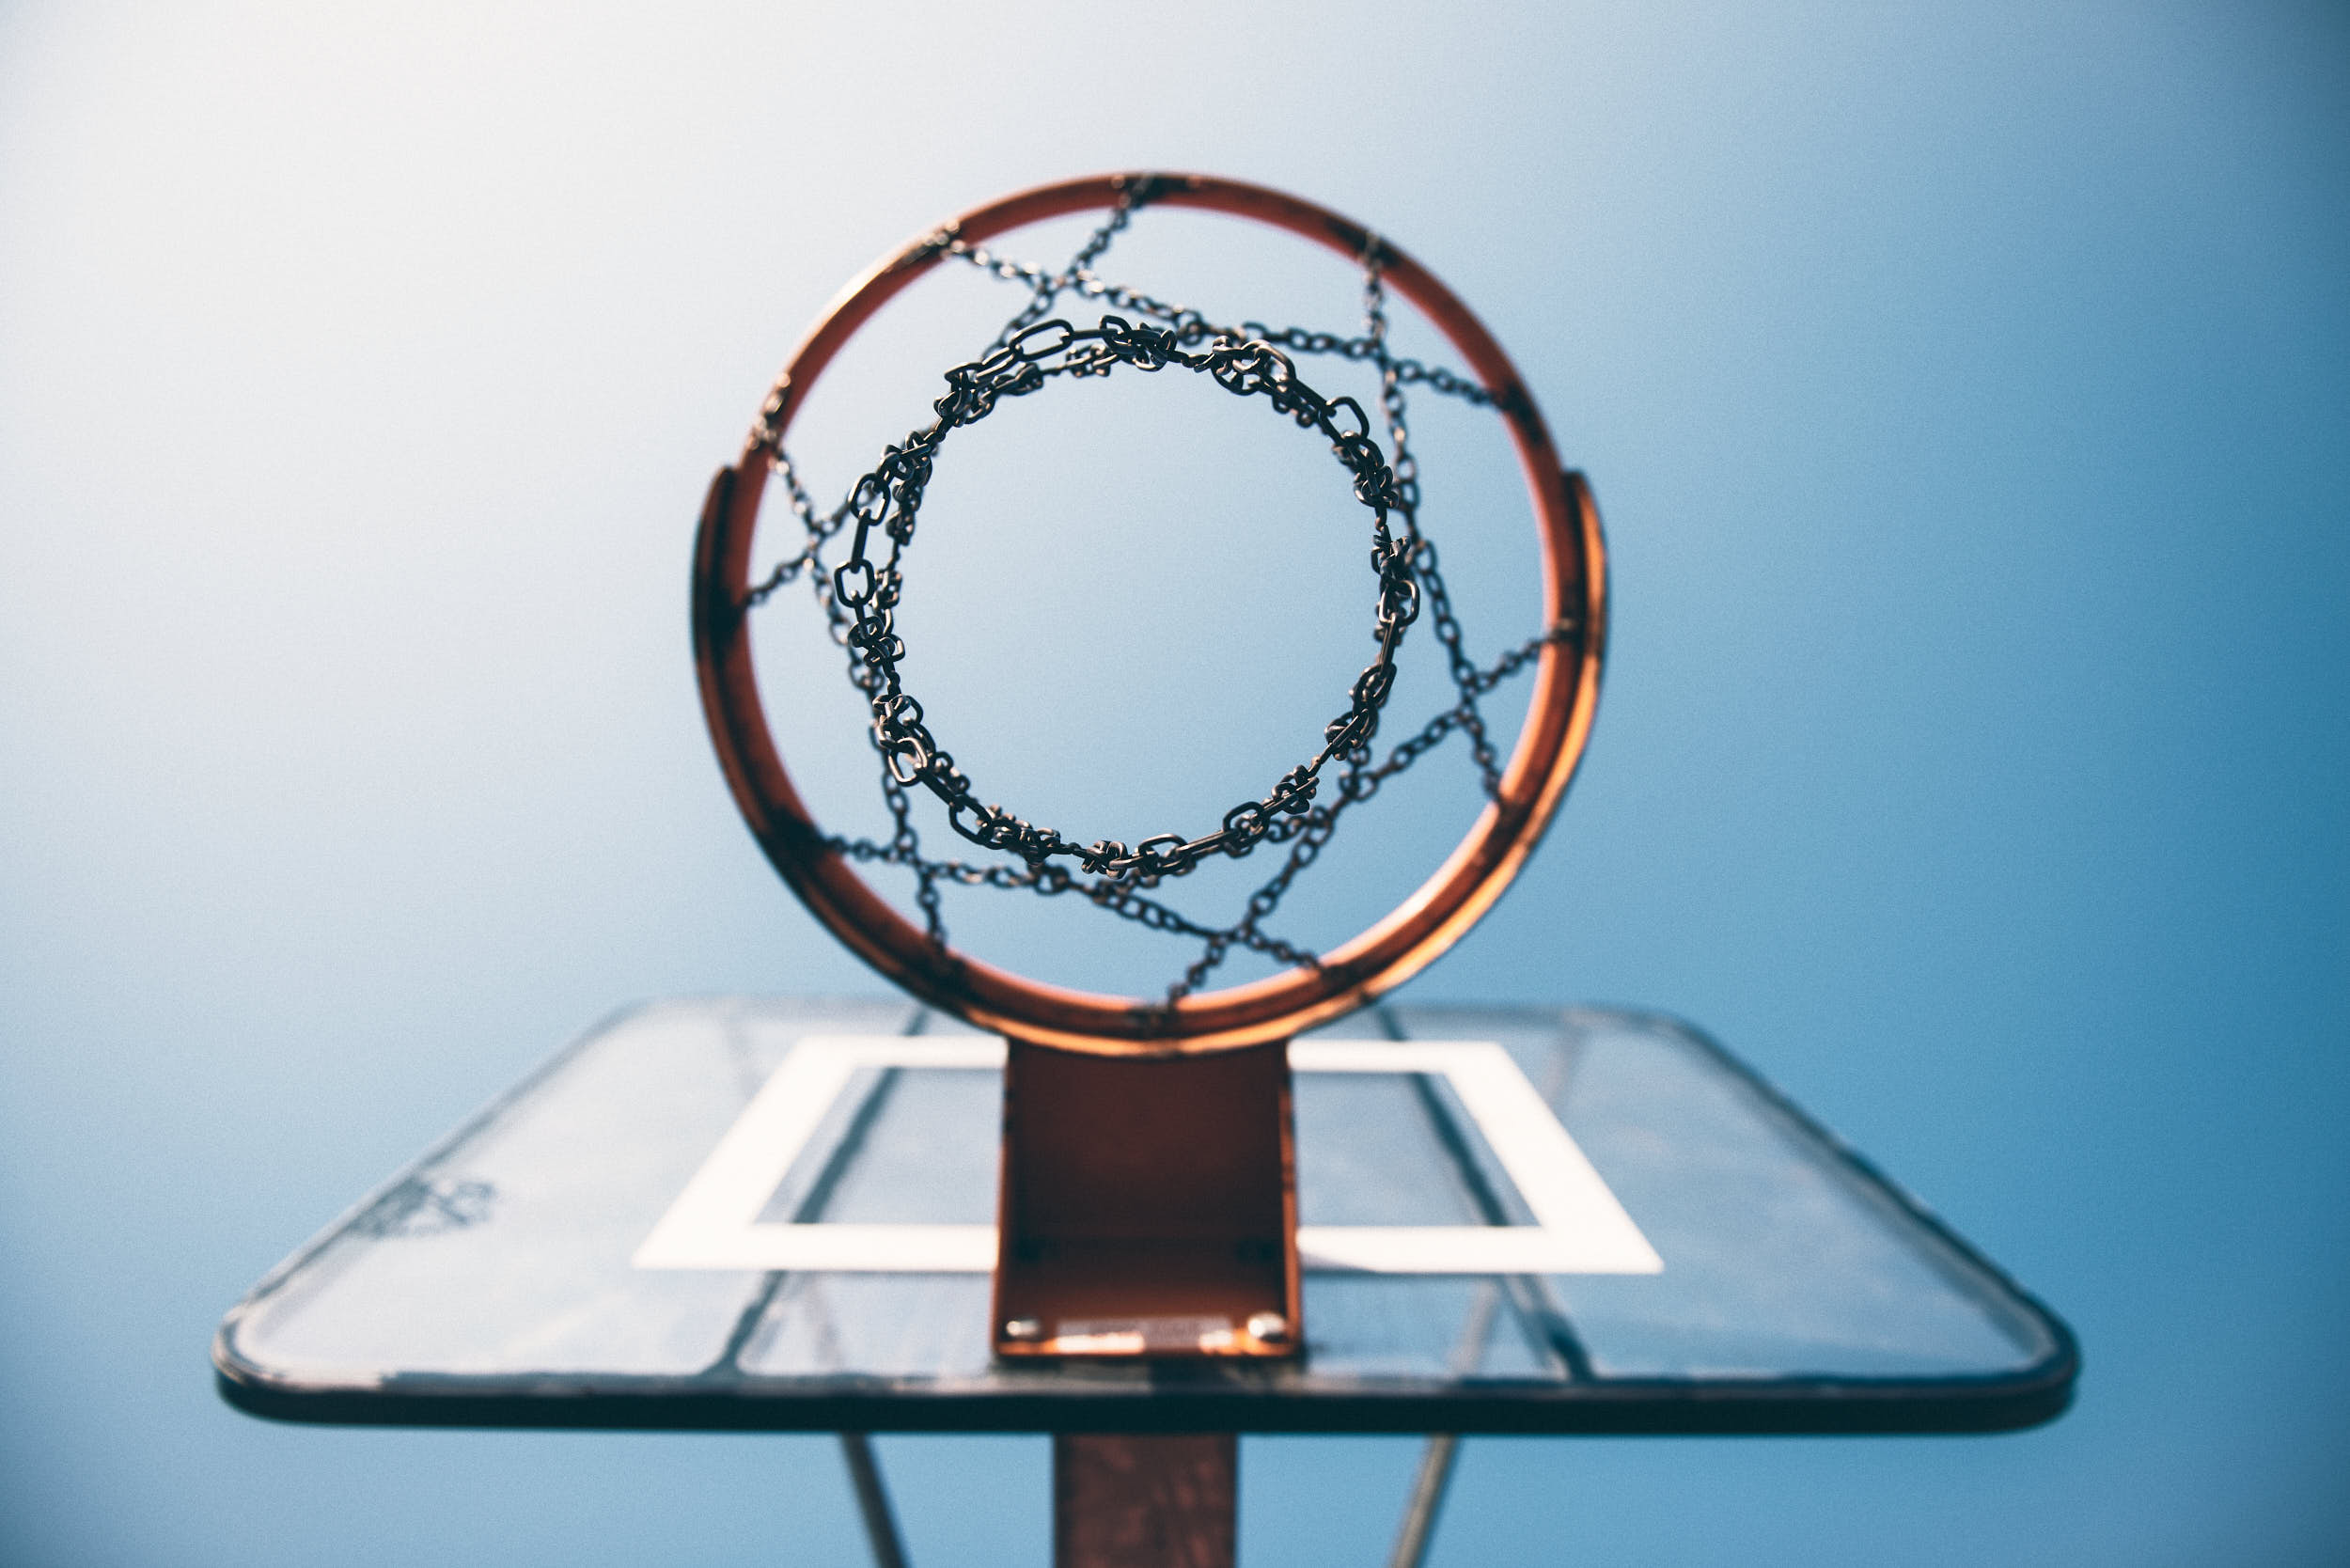 Basketball hoop with a chain net photographed from beneath with blue clear sky.